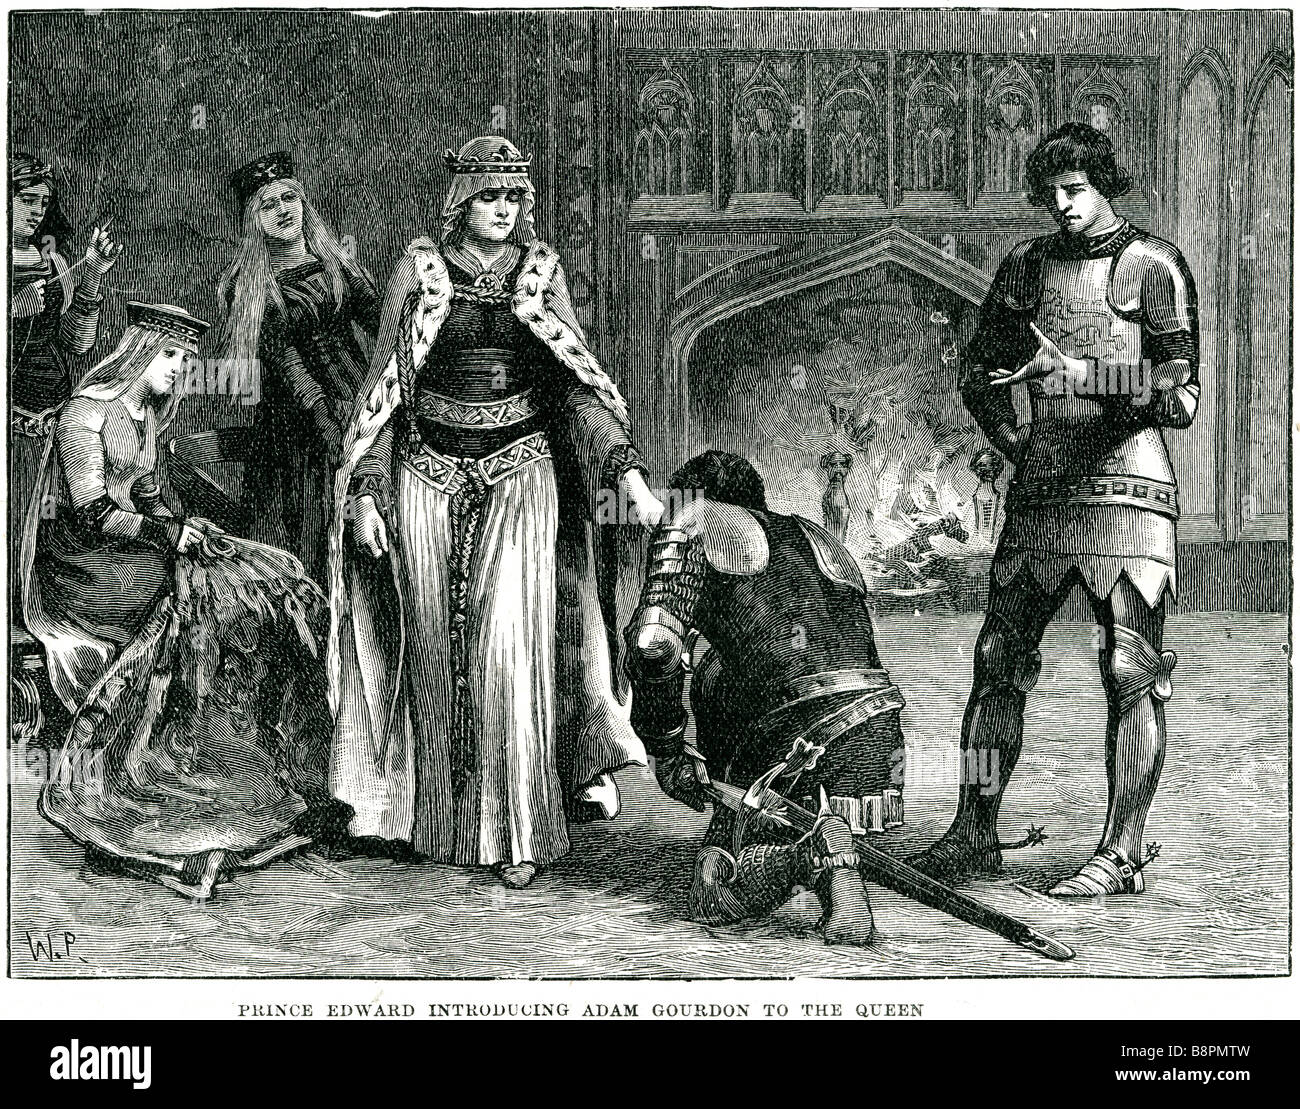 prince edward introducing adam gourdon to the queen Edward I (17 June 1239 – 7 July 1307), popularly known as Longshanks, the En Stock Photo